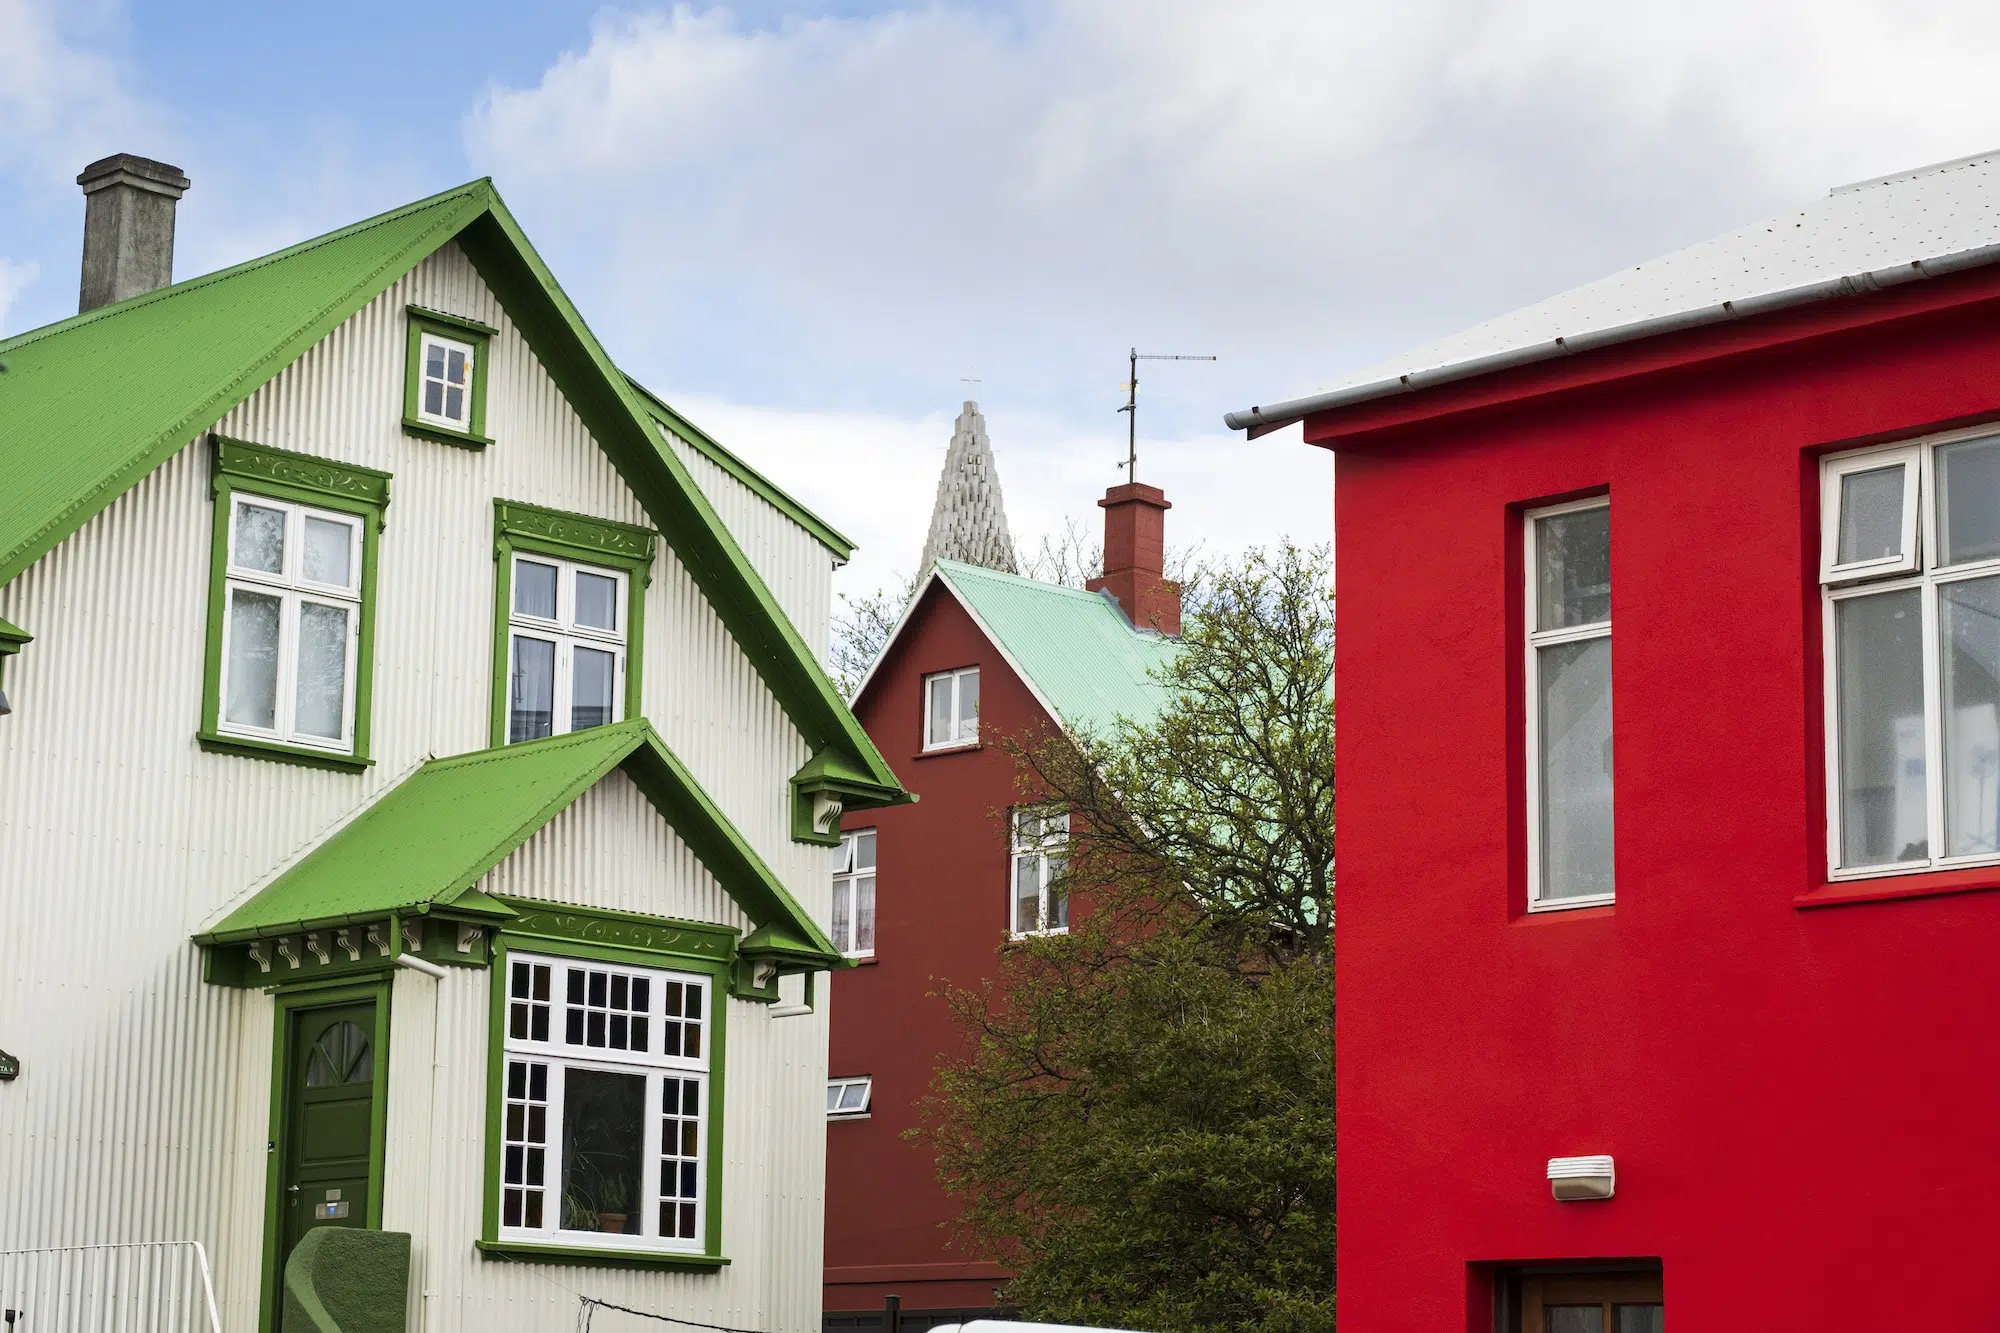 Airbnbs in Iceland Used for Sex Work